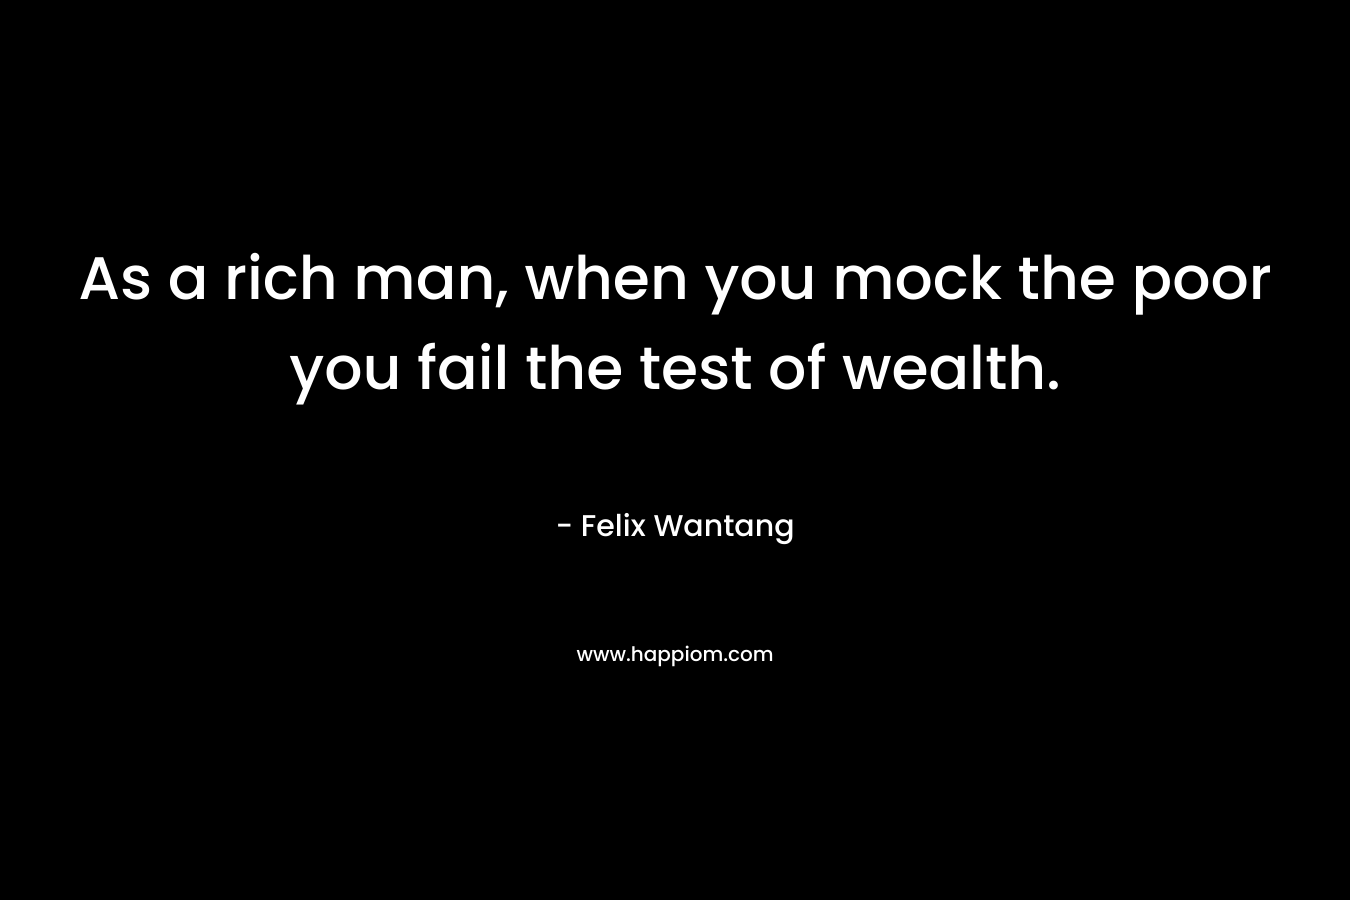 As a rich man, when you mock the poor you fail the test of wealth.